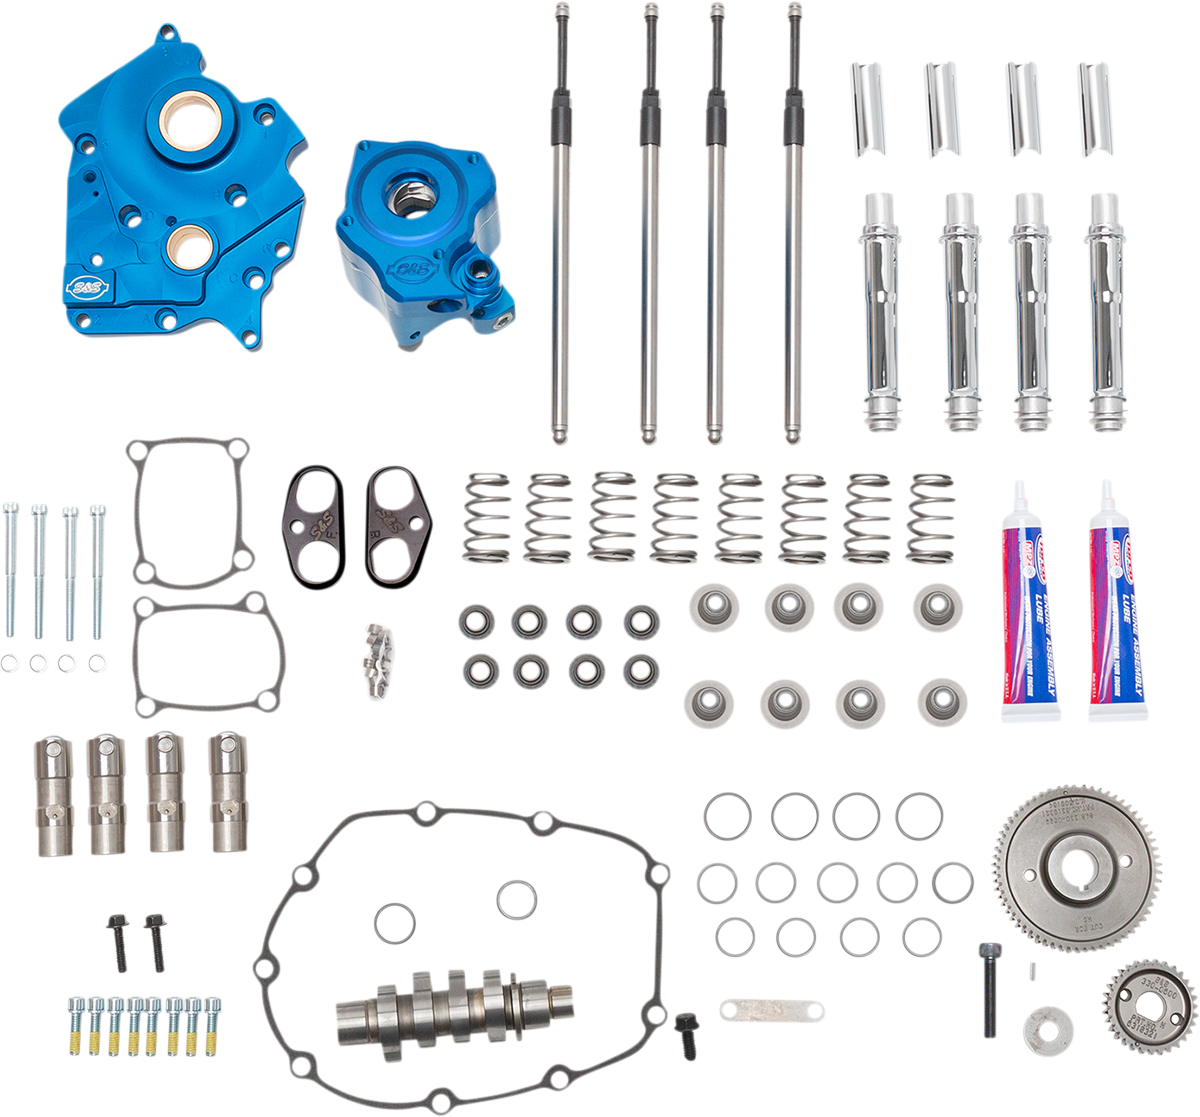 S&S CYCLE Cam Chest Kit with Plate M8 - Gear Drive - Oil Cooled - 540 Cam - Chrome Pushrods 310-1119